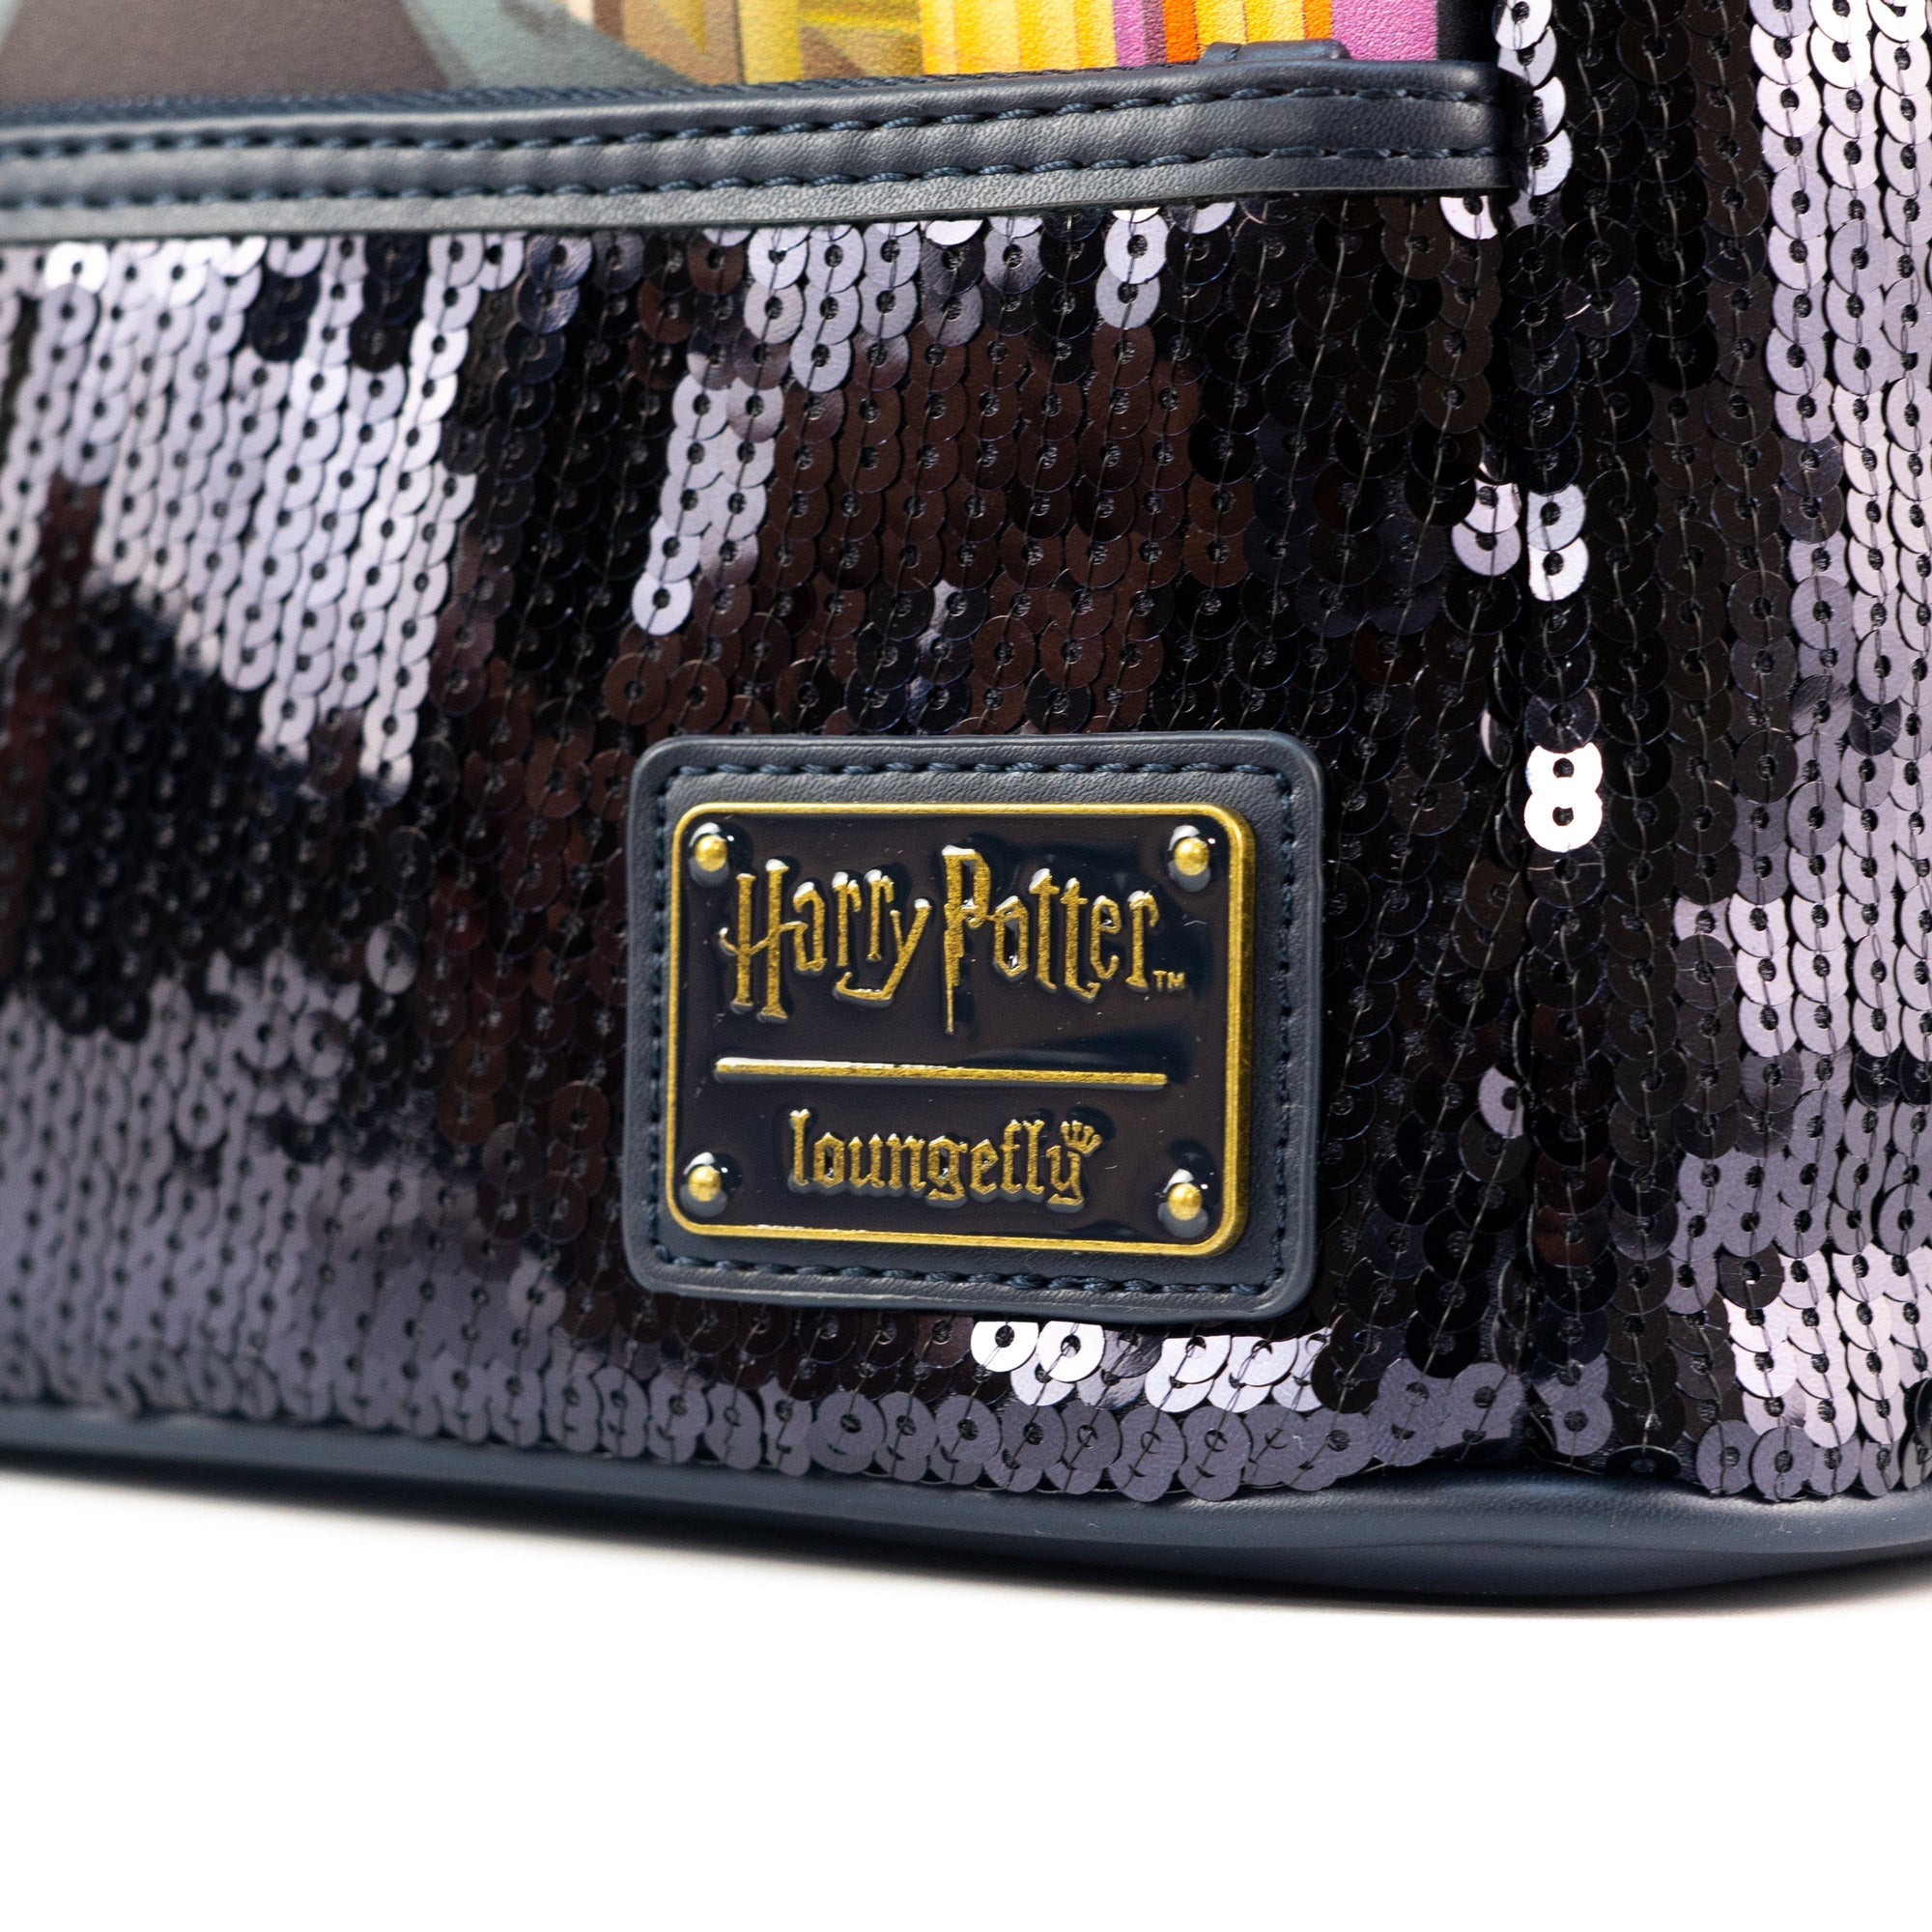 Loungefly x Harry Potter Diagon Alley Sequin Mini Backpack - GeekCore